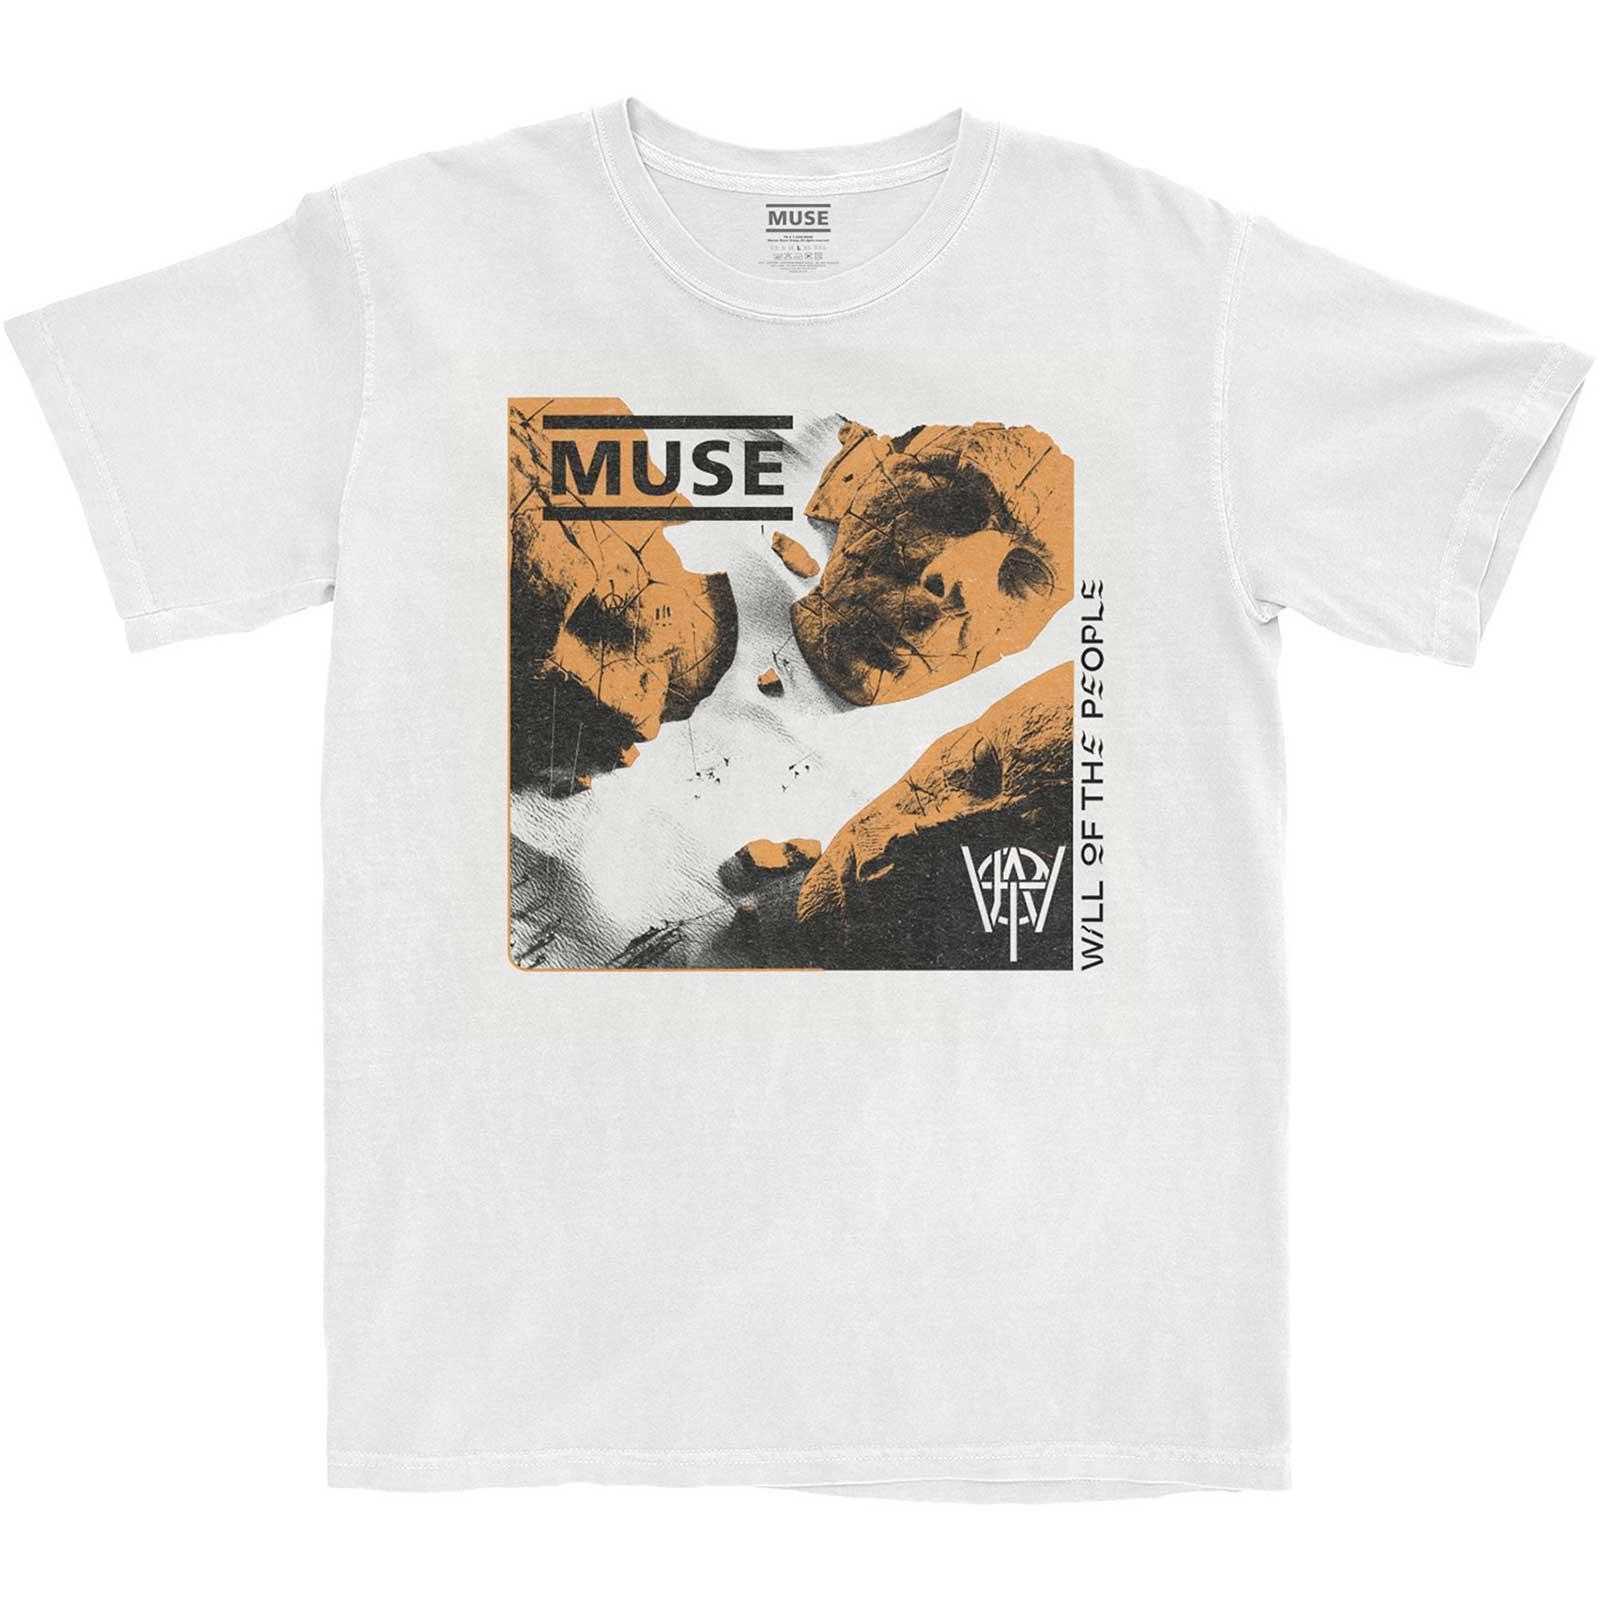 Muse Unisex Adult Will Of The People Cotton T-Shirt (White) (XXL)